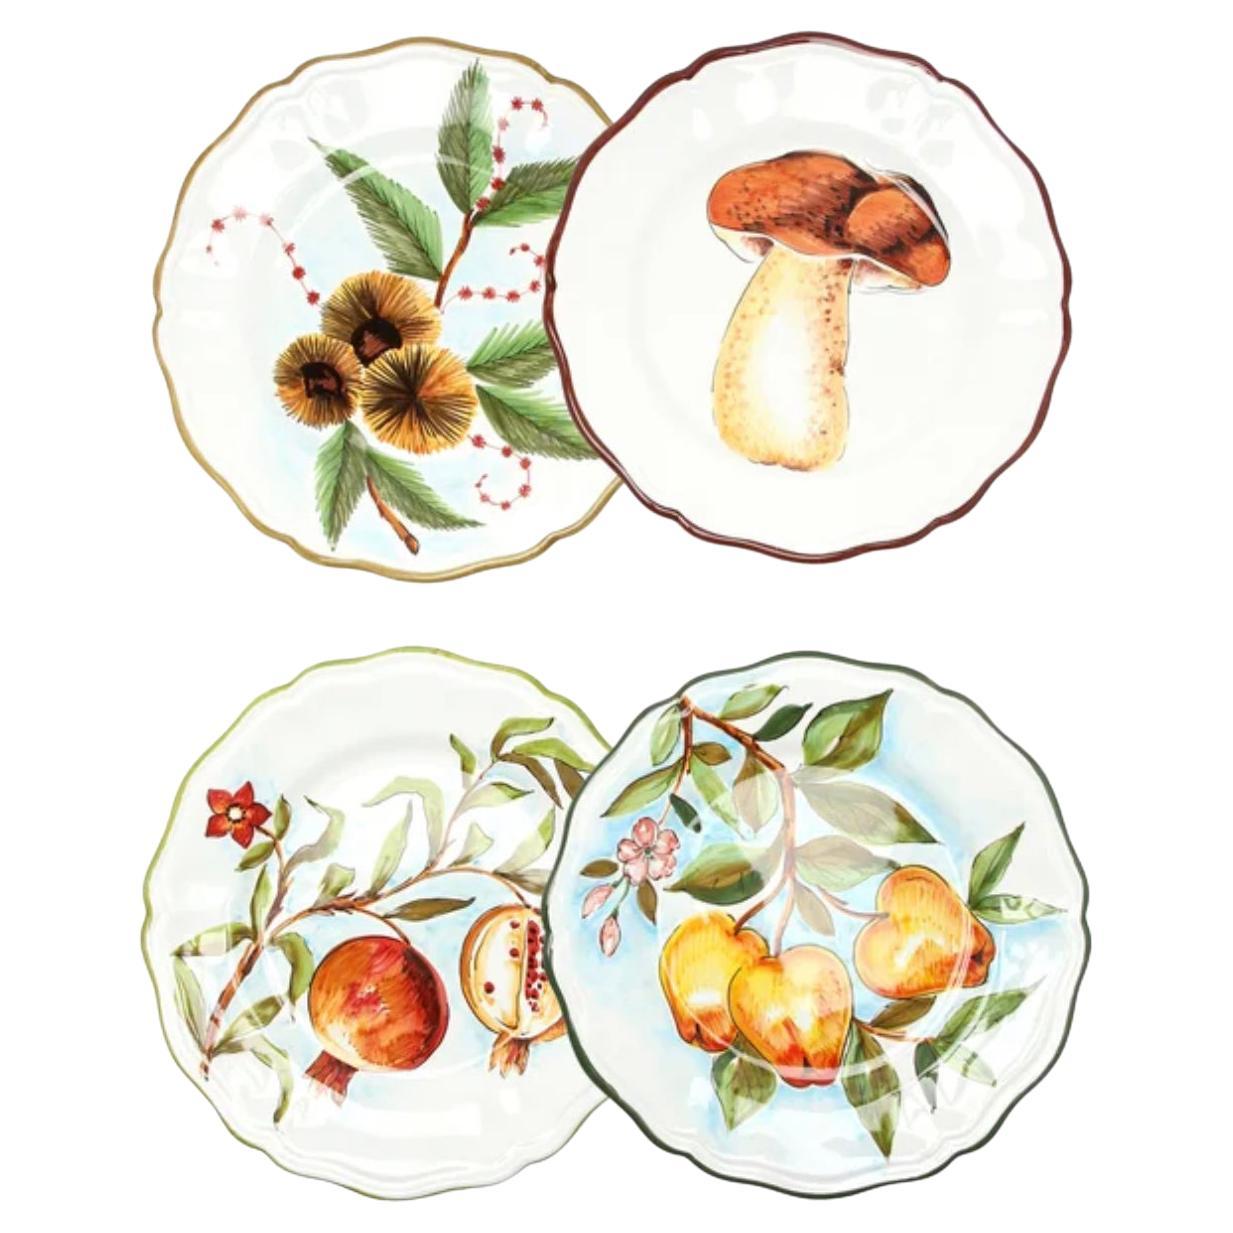 Les Ottomans Le Bois Ceramic Plates Set of 4, Hand-Painted Scallop-Edged, Italy 